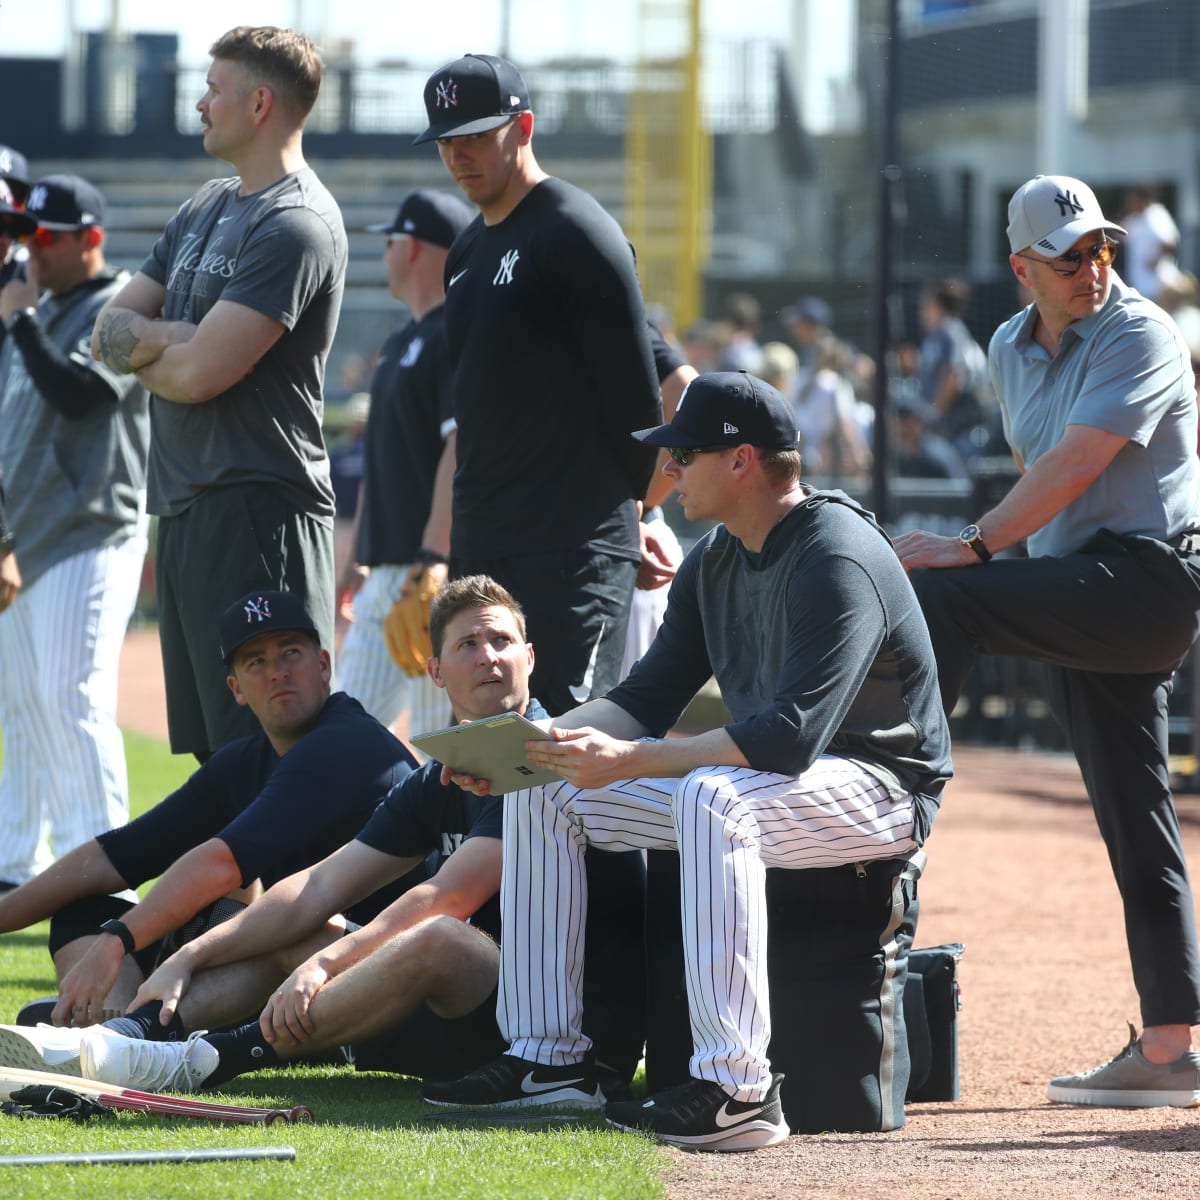 Yankees minor league manager Rachel Balkovec wrapping up second